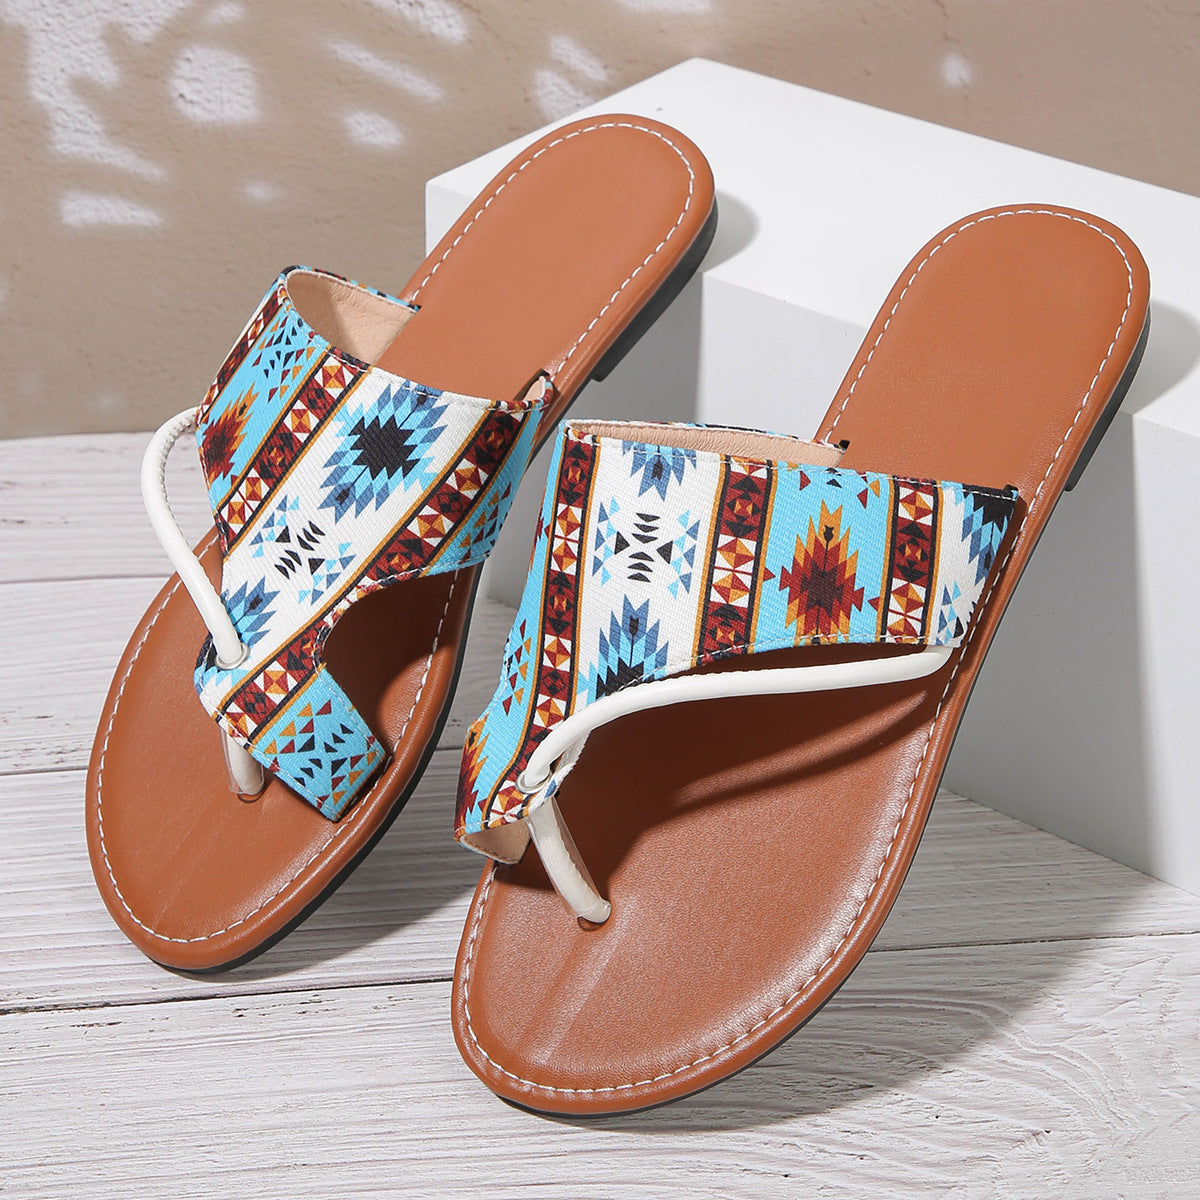 Breathable Printed Toe Covering Roman Style Sandals